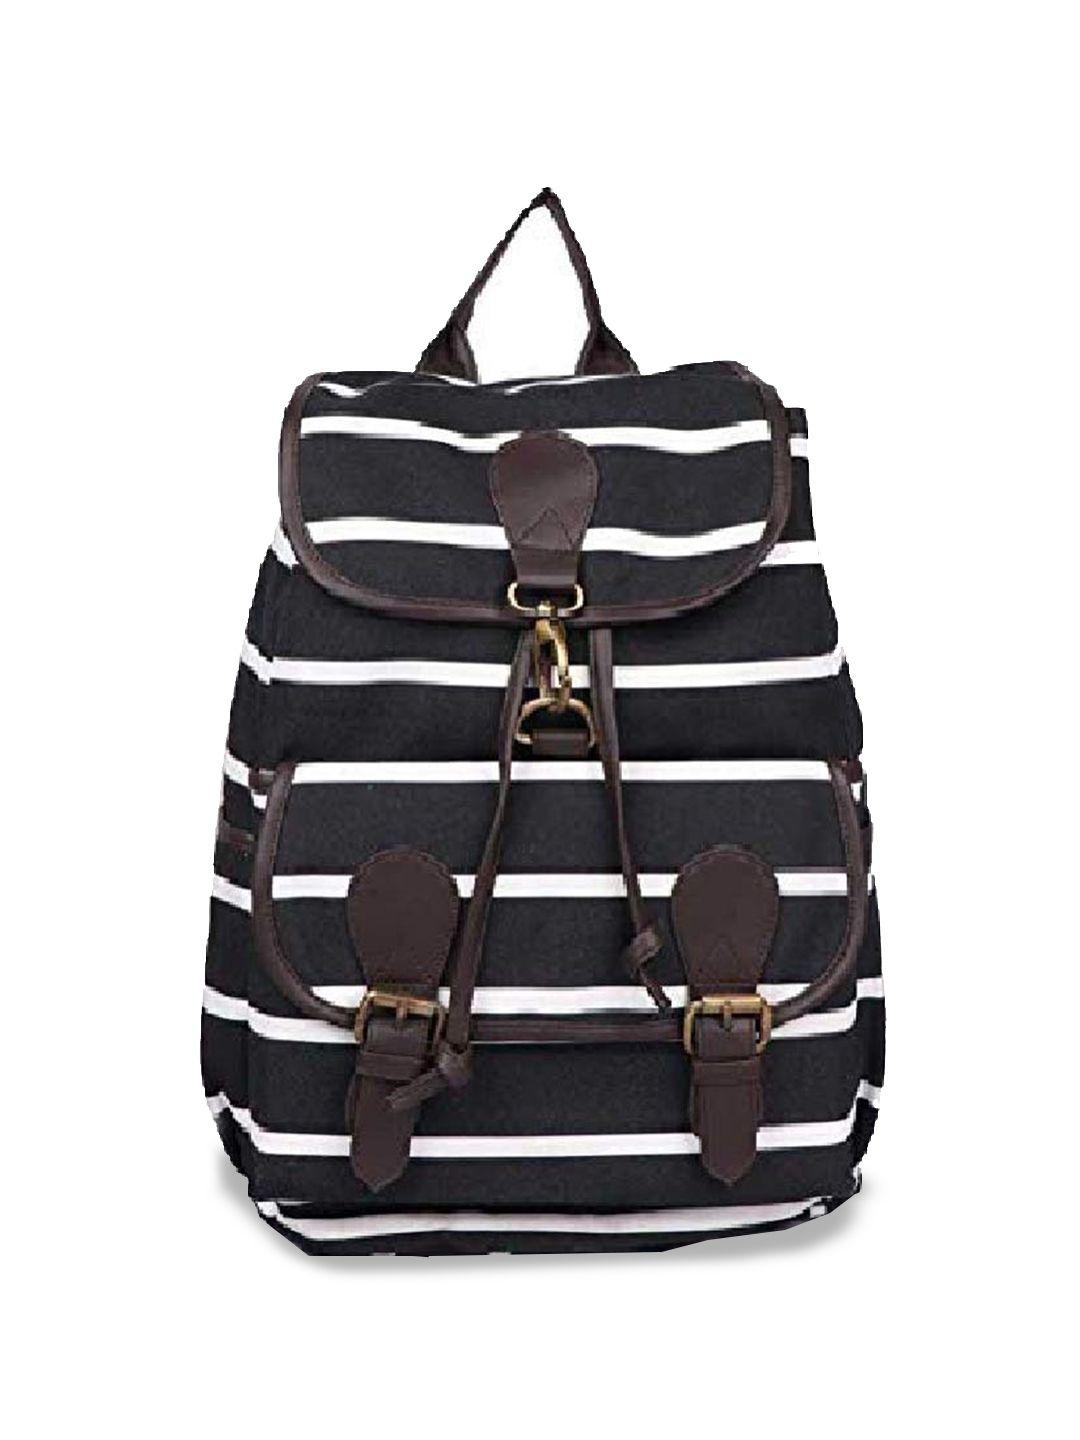 mast & harbour striped canvas backpack